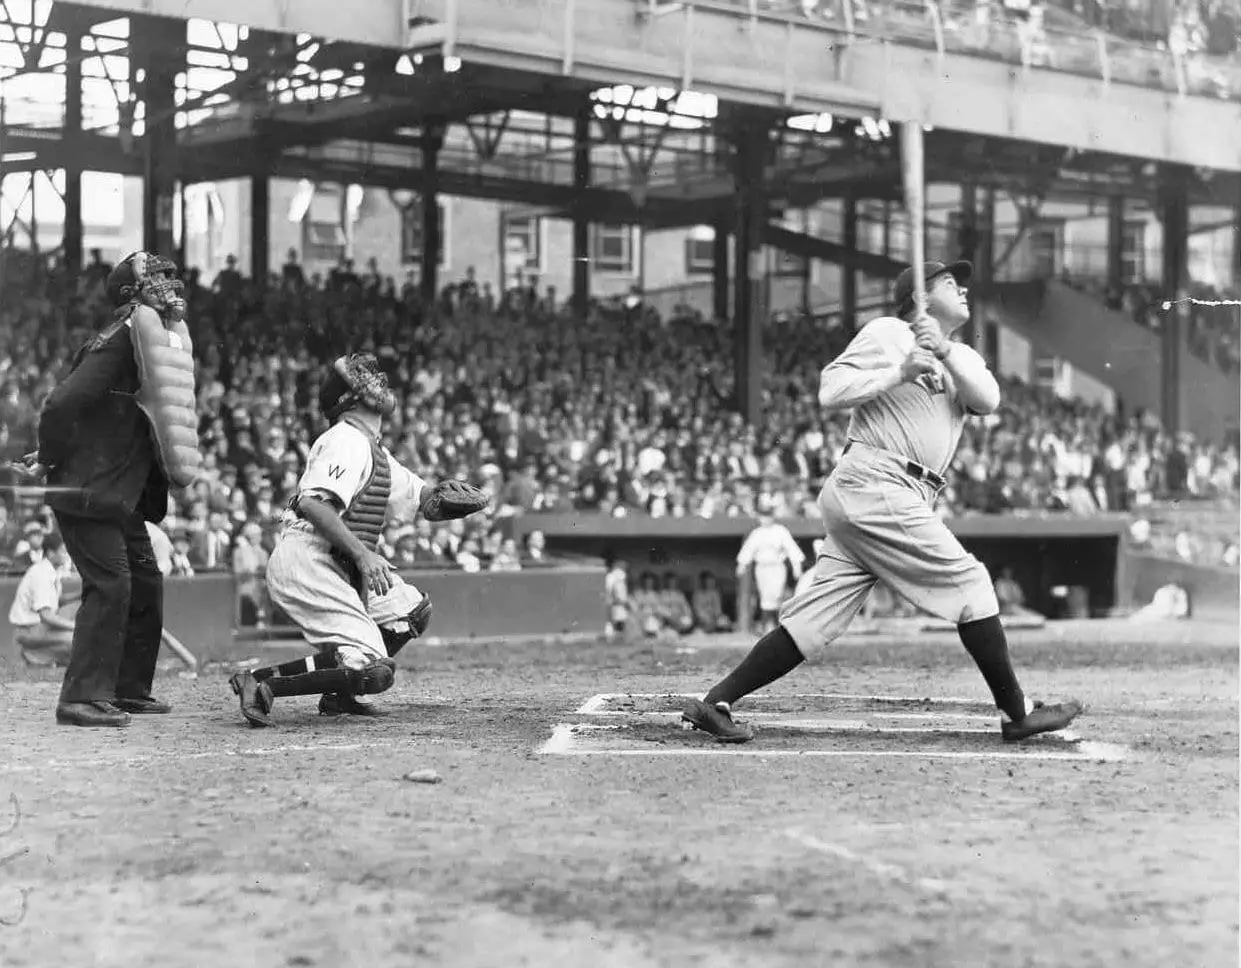 Babe Ruth and the Yankees came to town in September of 1934 for one last hu...